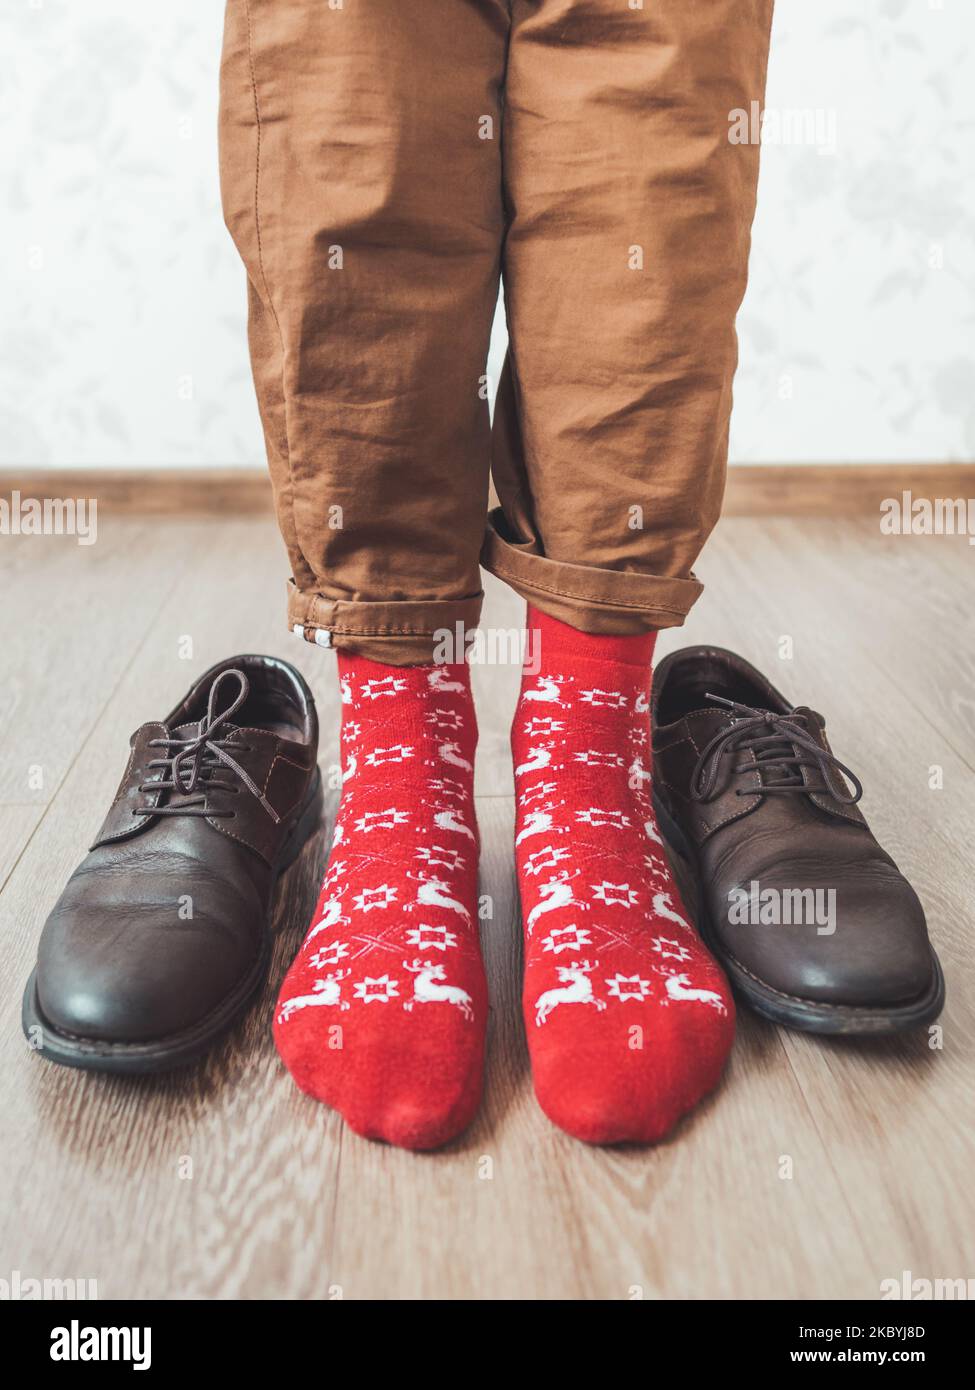 Young man in chinos trousers and bright red socks with reindeers on them is ready to wear suede shoes. Scandinavian pattern. Winter holiday spirit. Stock Photo